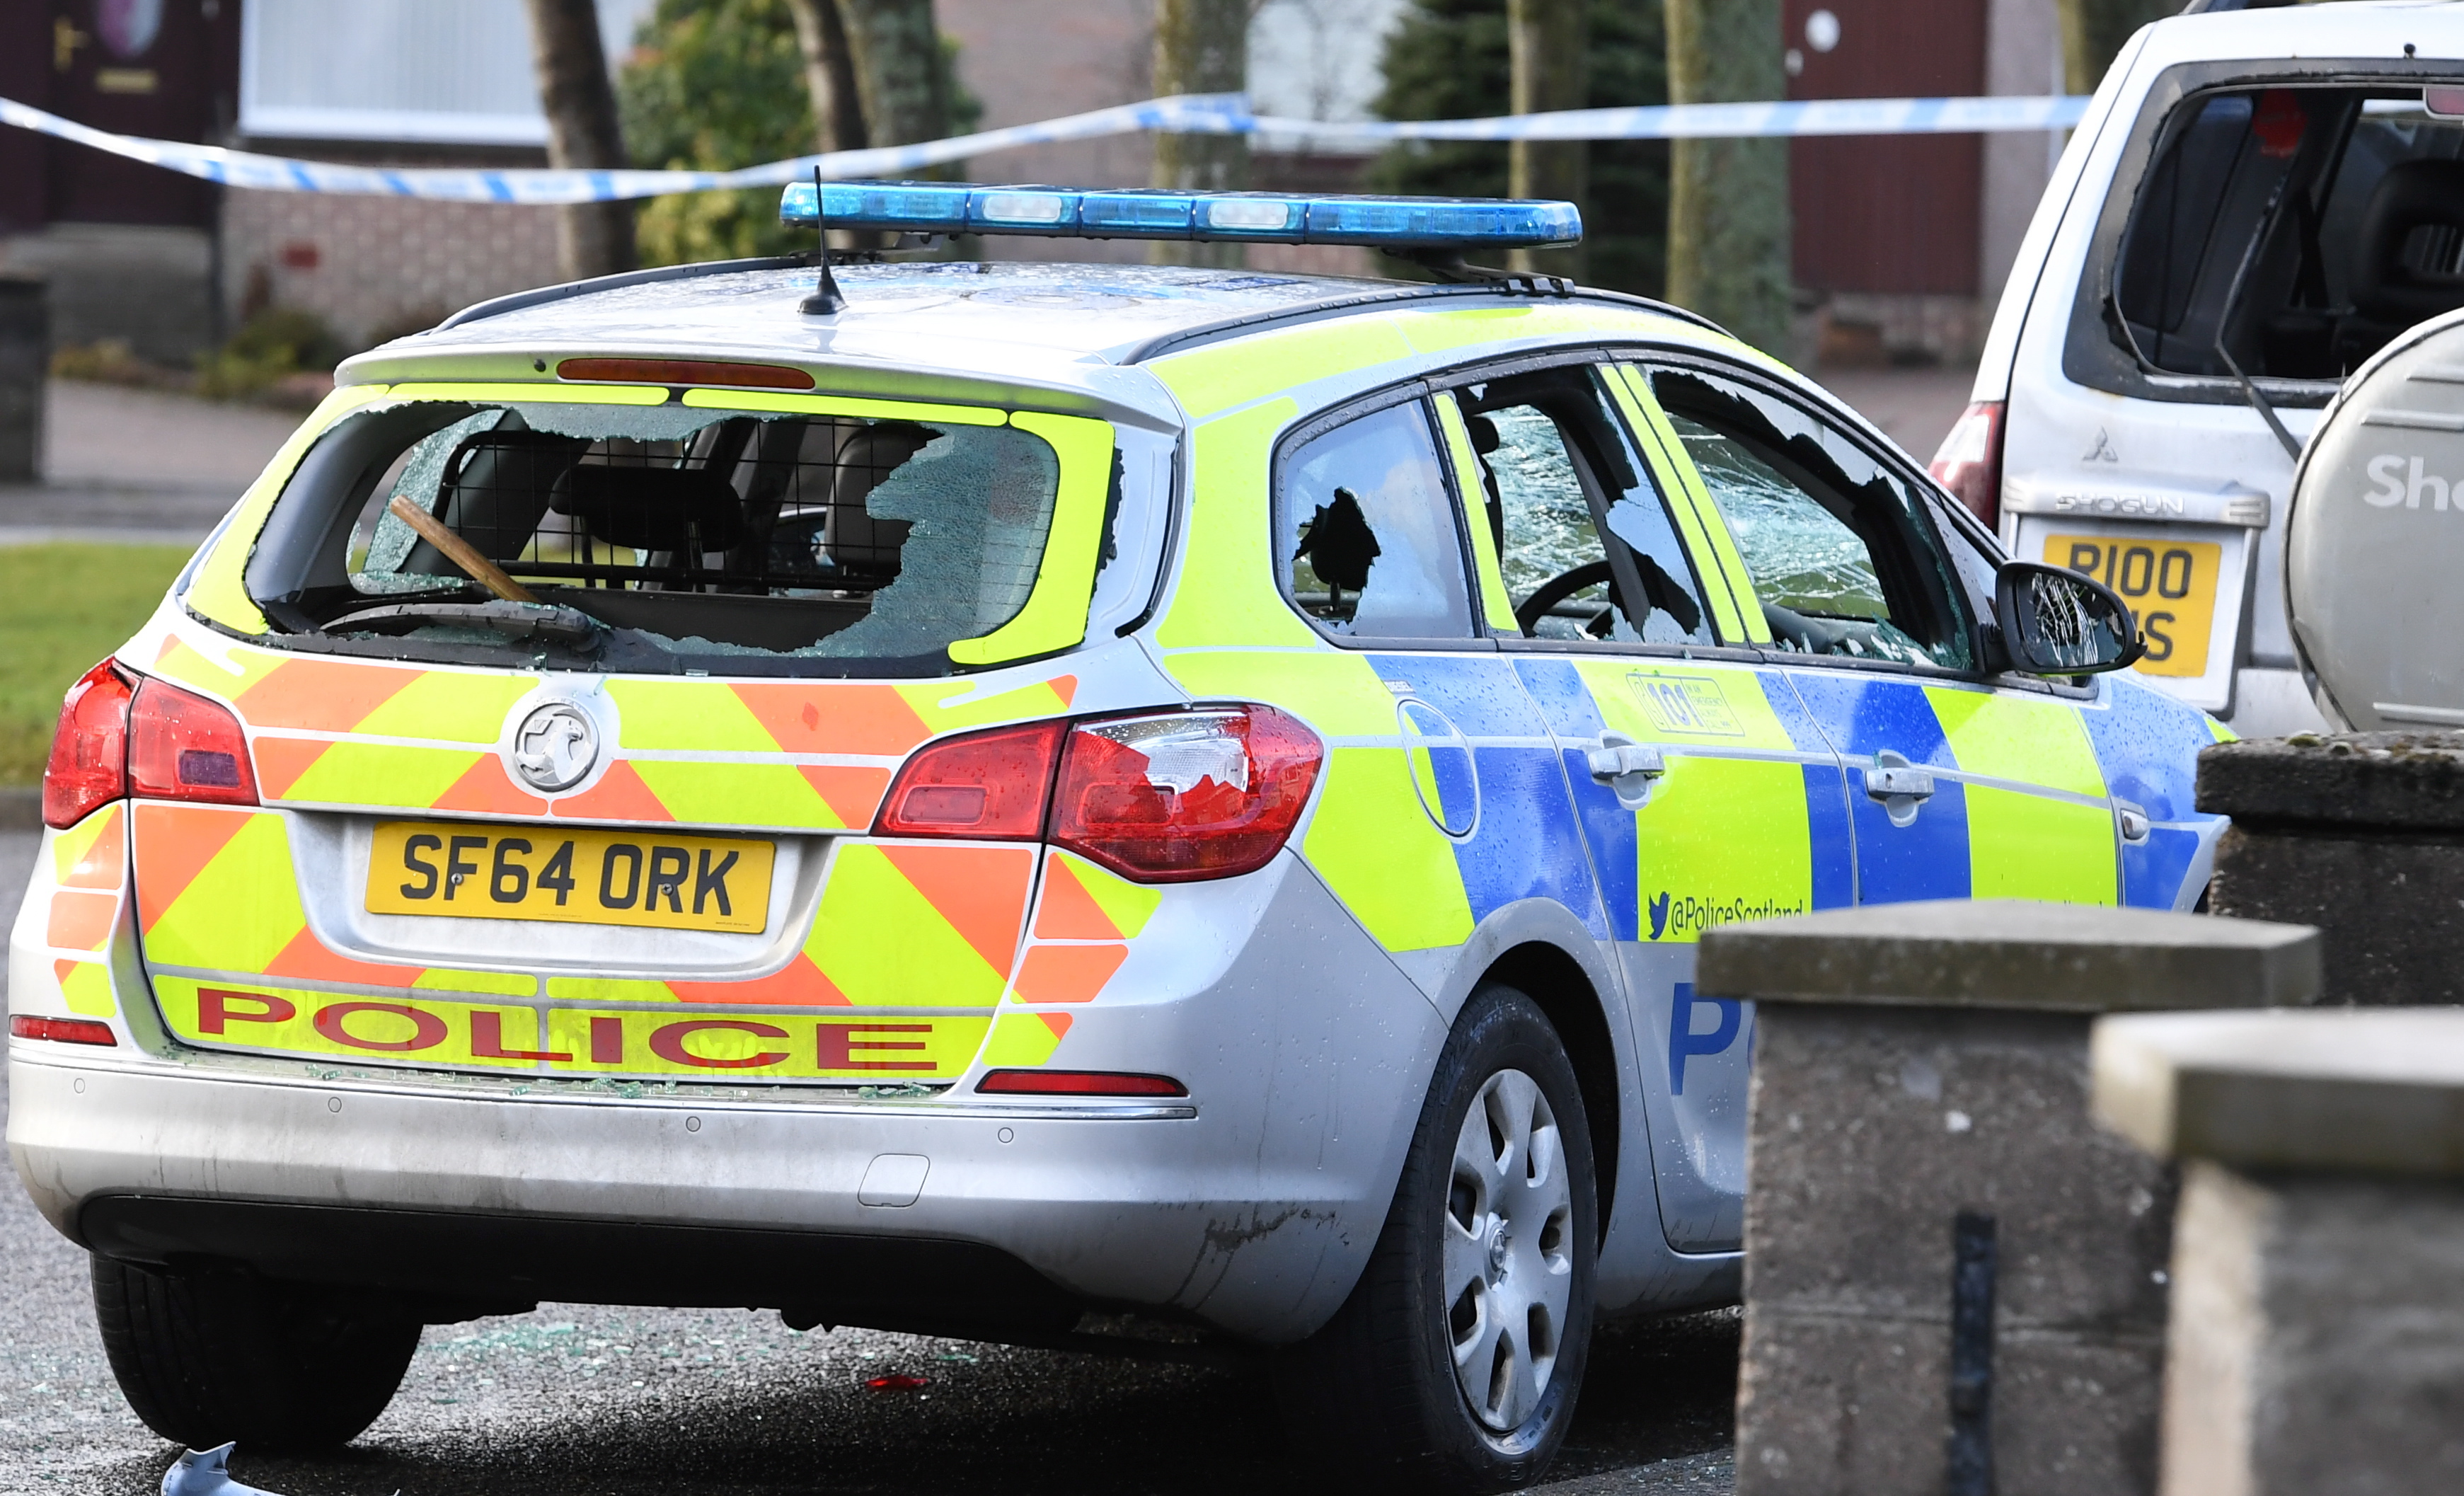 A police car was smashed in Dyce.